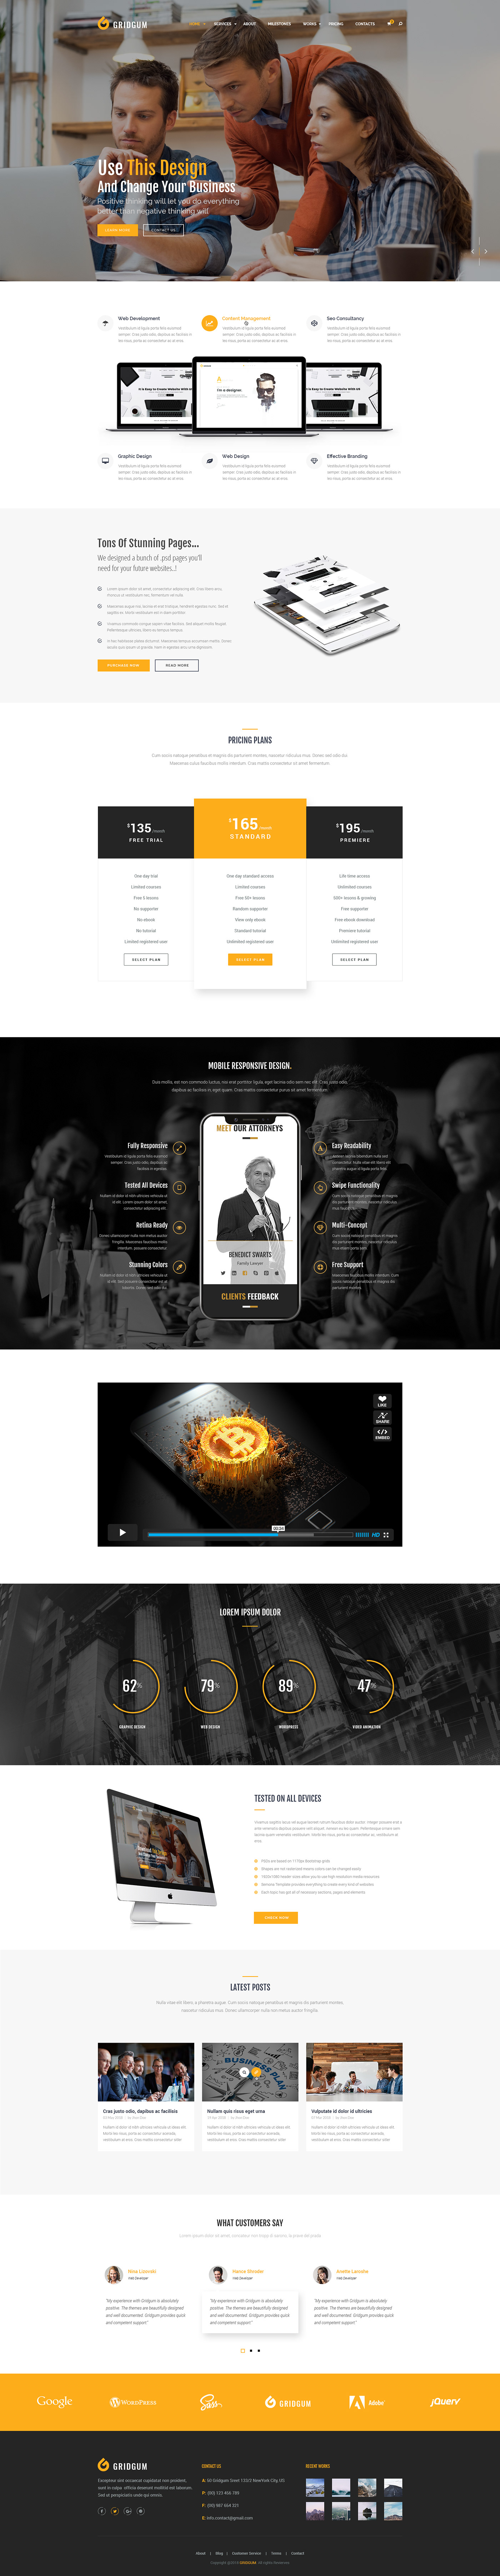 Business co - Free psd template